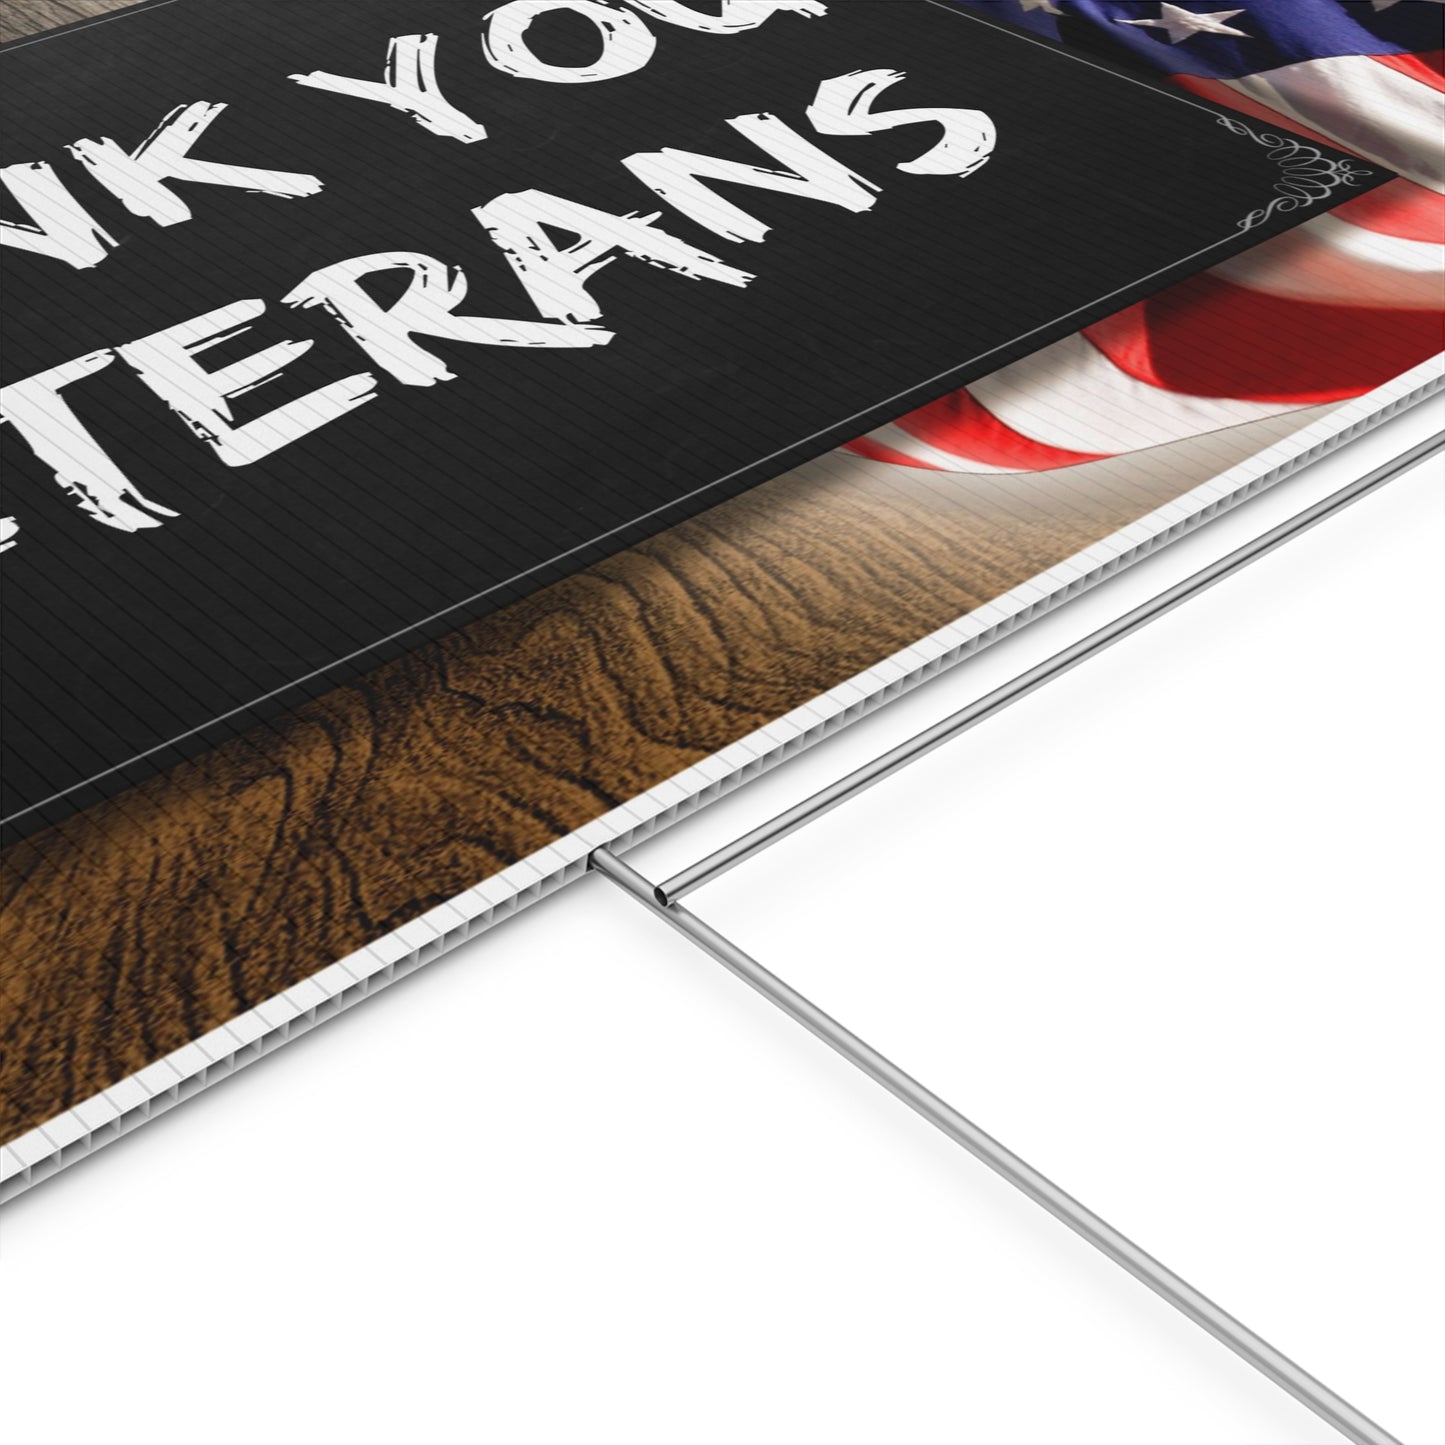 Thank You Veterans, American Flag, Veteran's Day, Yard Sign, Printed 2-Sided, 12x18, 24x18 or 36x24, Metal H-Stake Included, v1